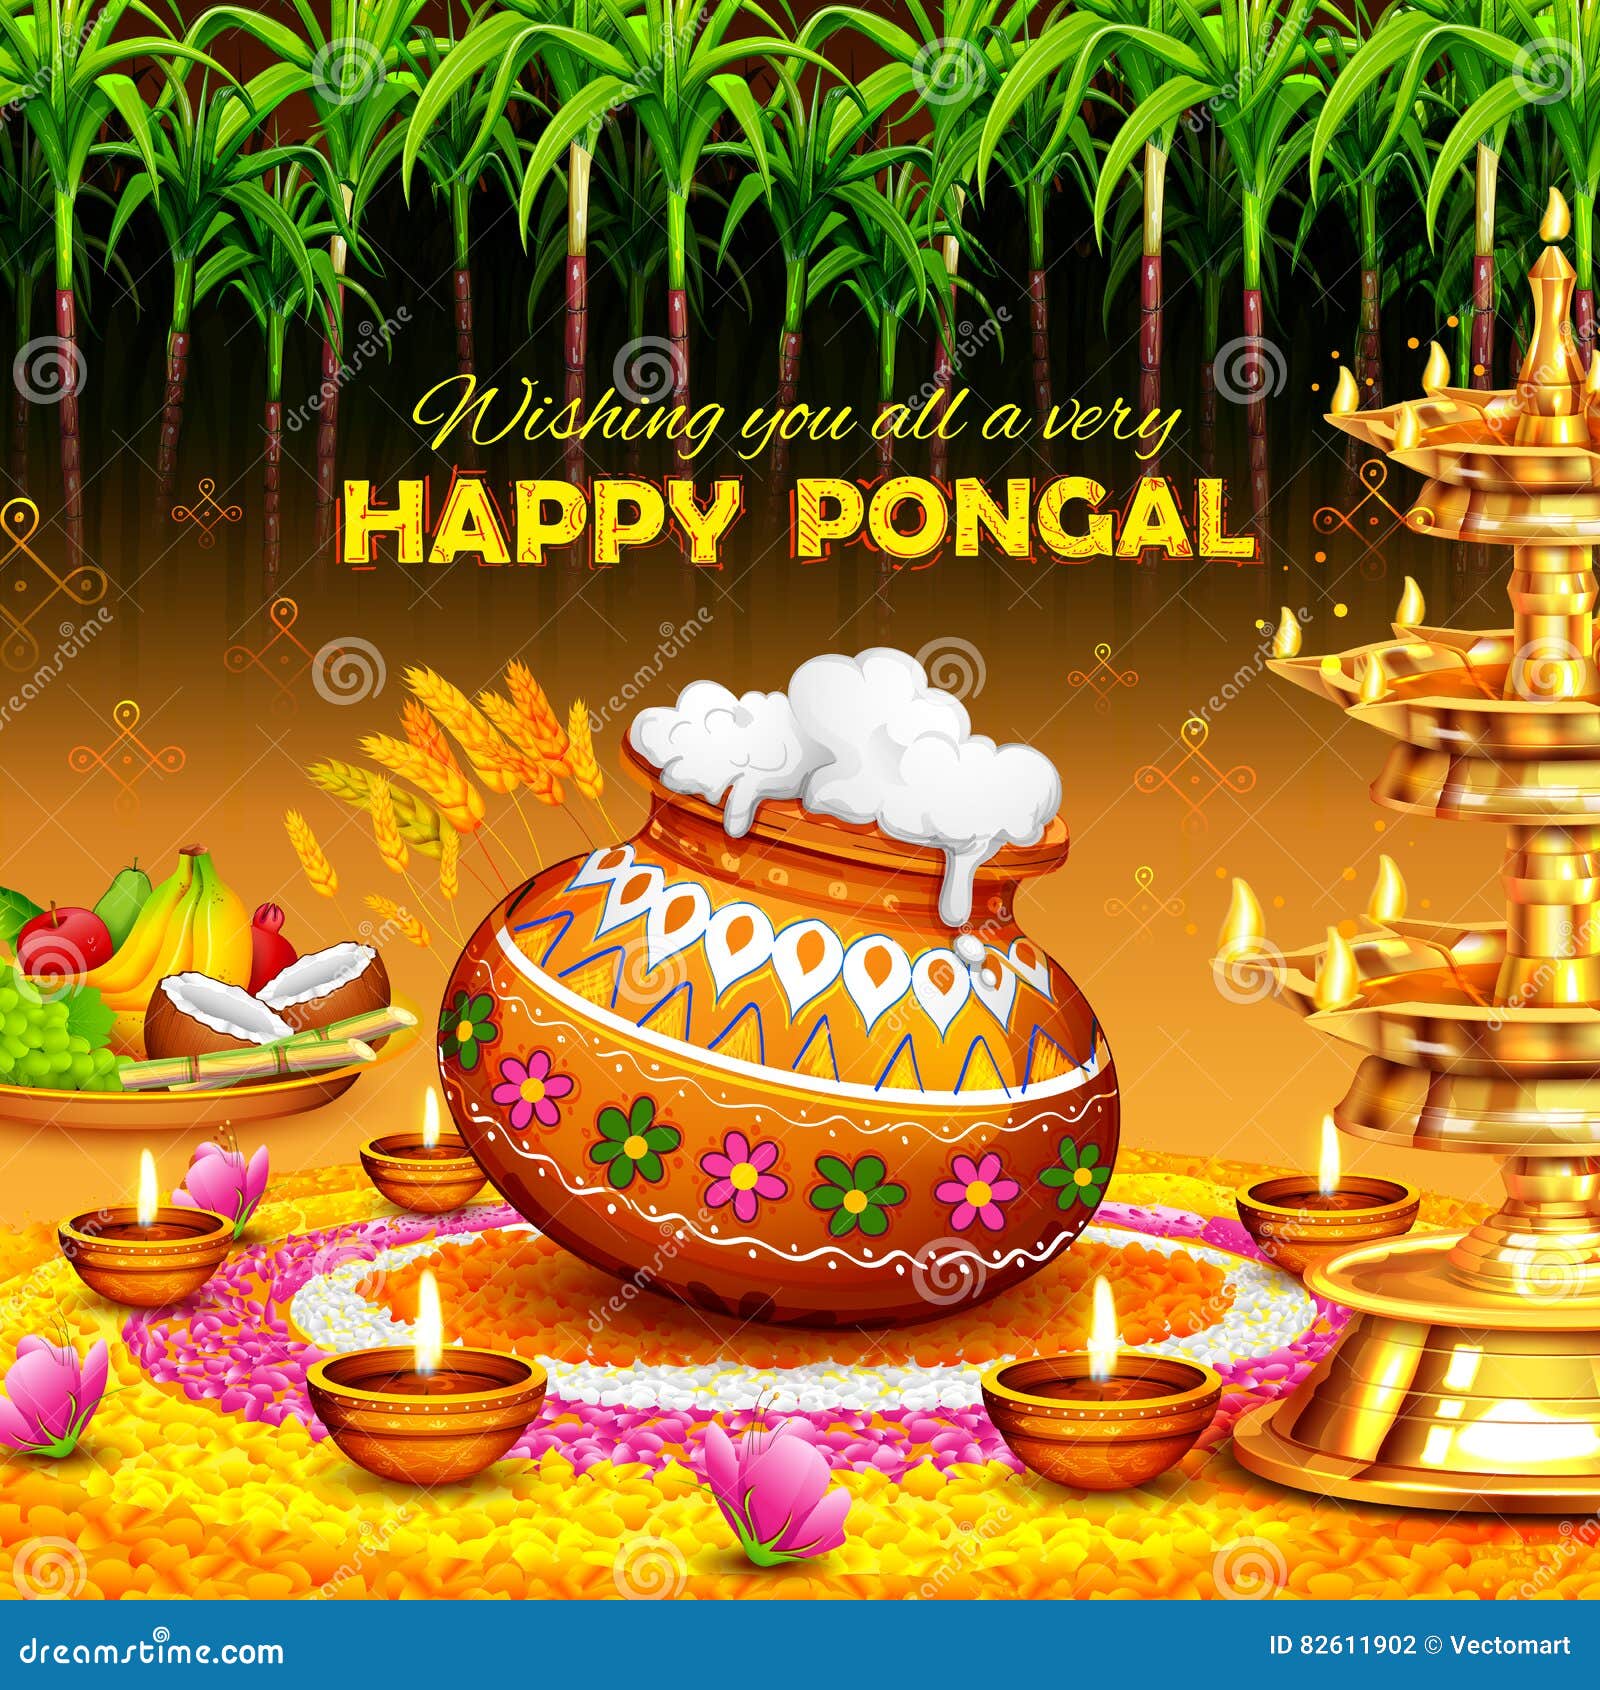 Happy Pongal Greeting Background Stock Vector - Illustration of ...